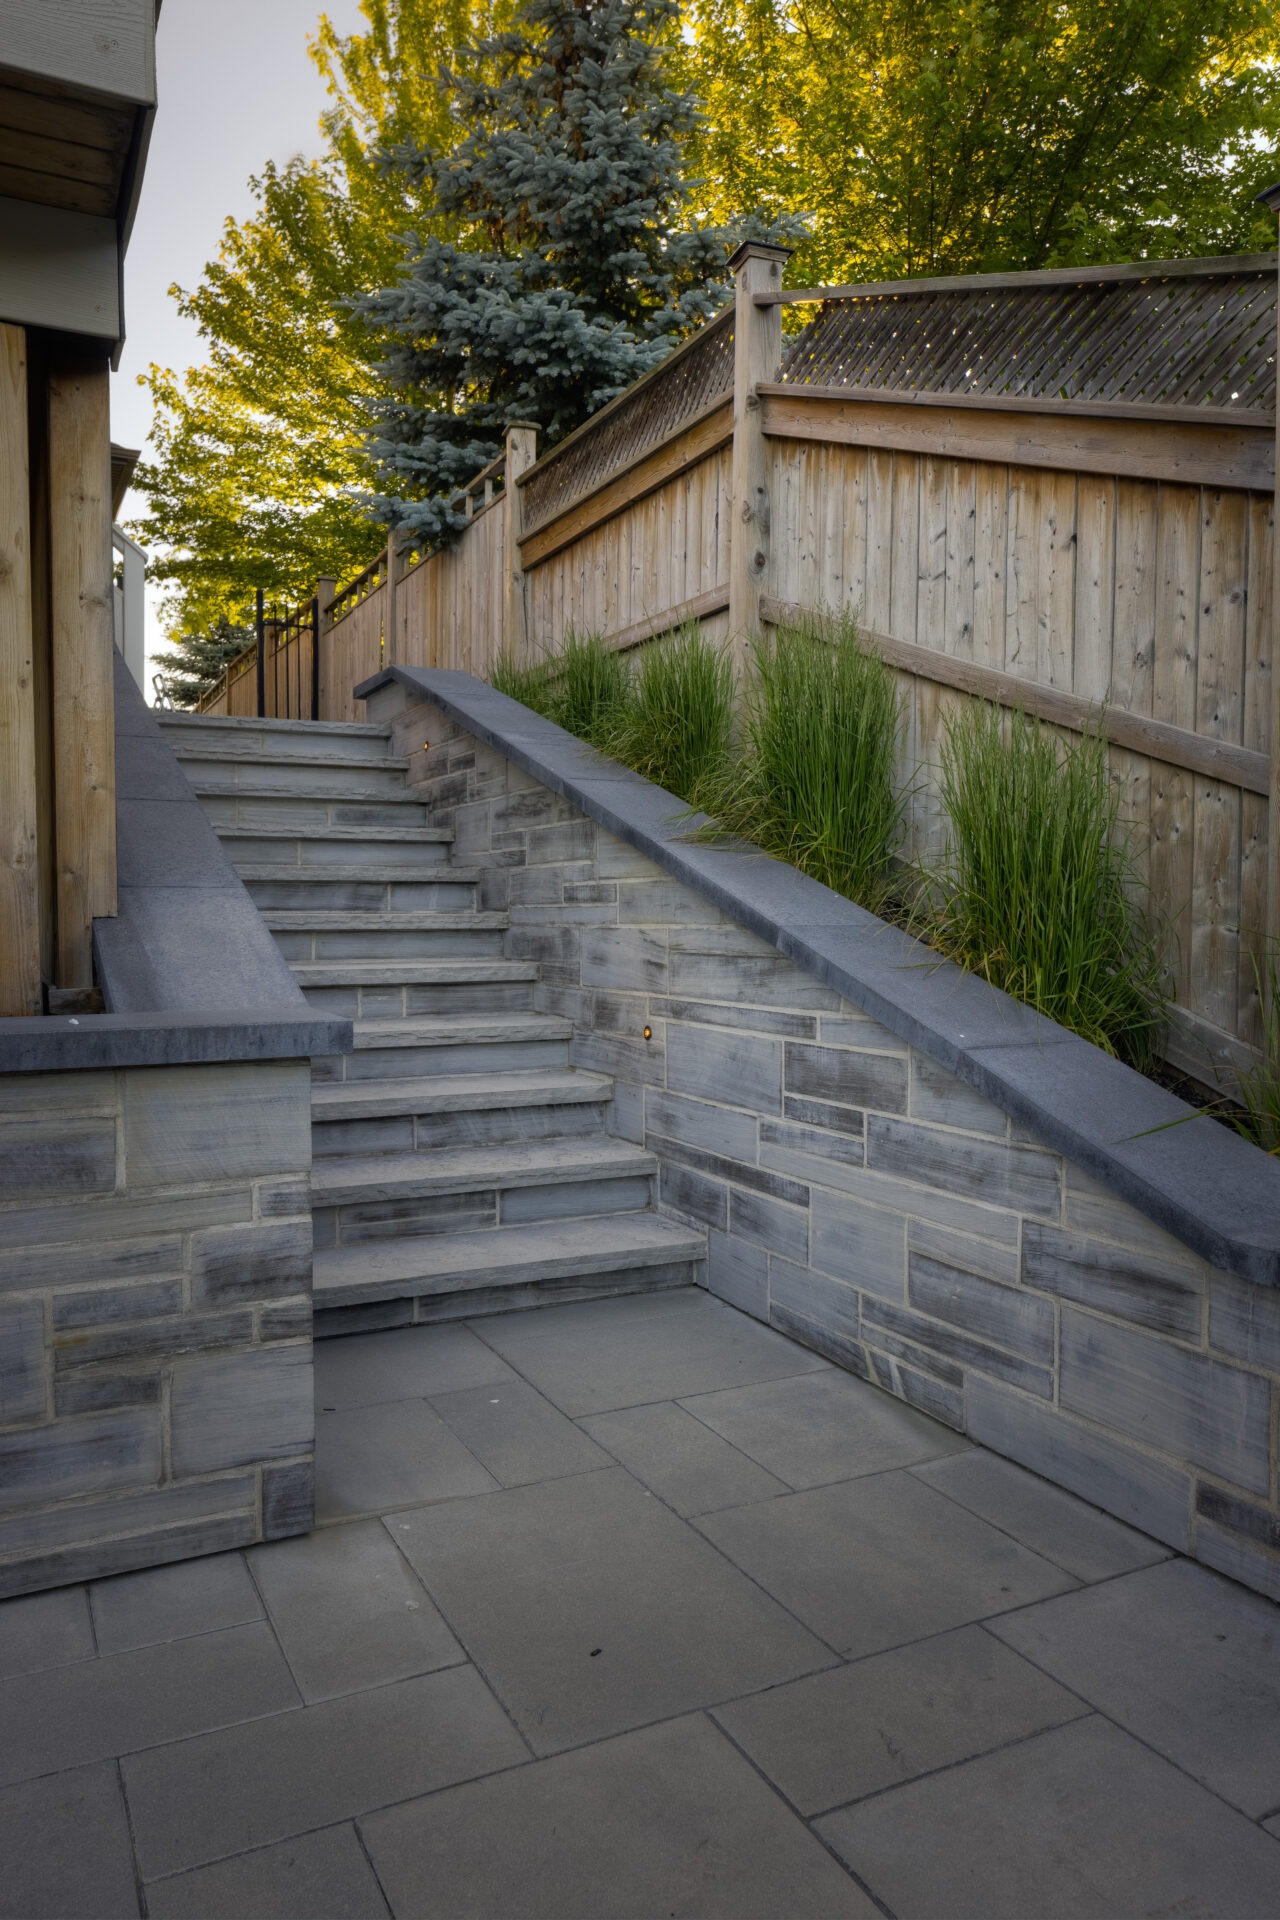 A stone stairway flanked by grass planters leads up between a wooden fence and a building, beneath trees with autumn foliage.